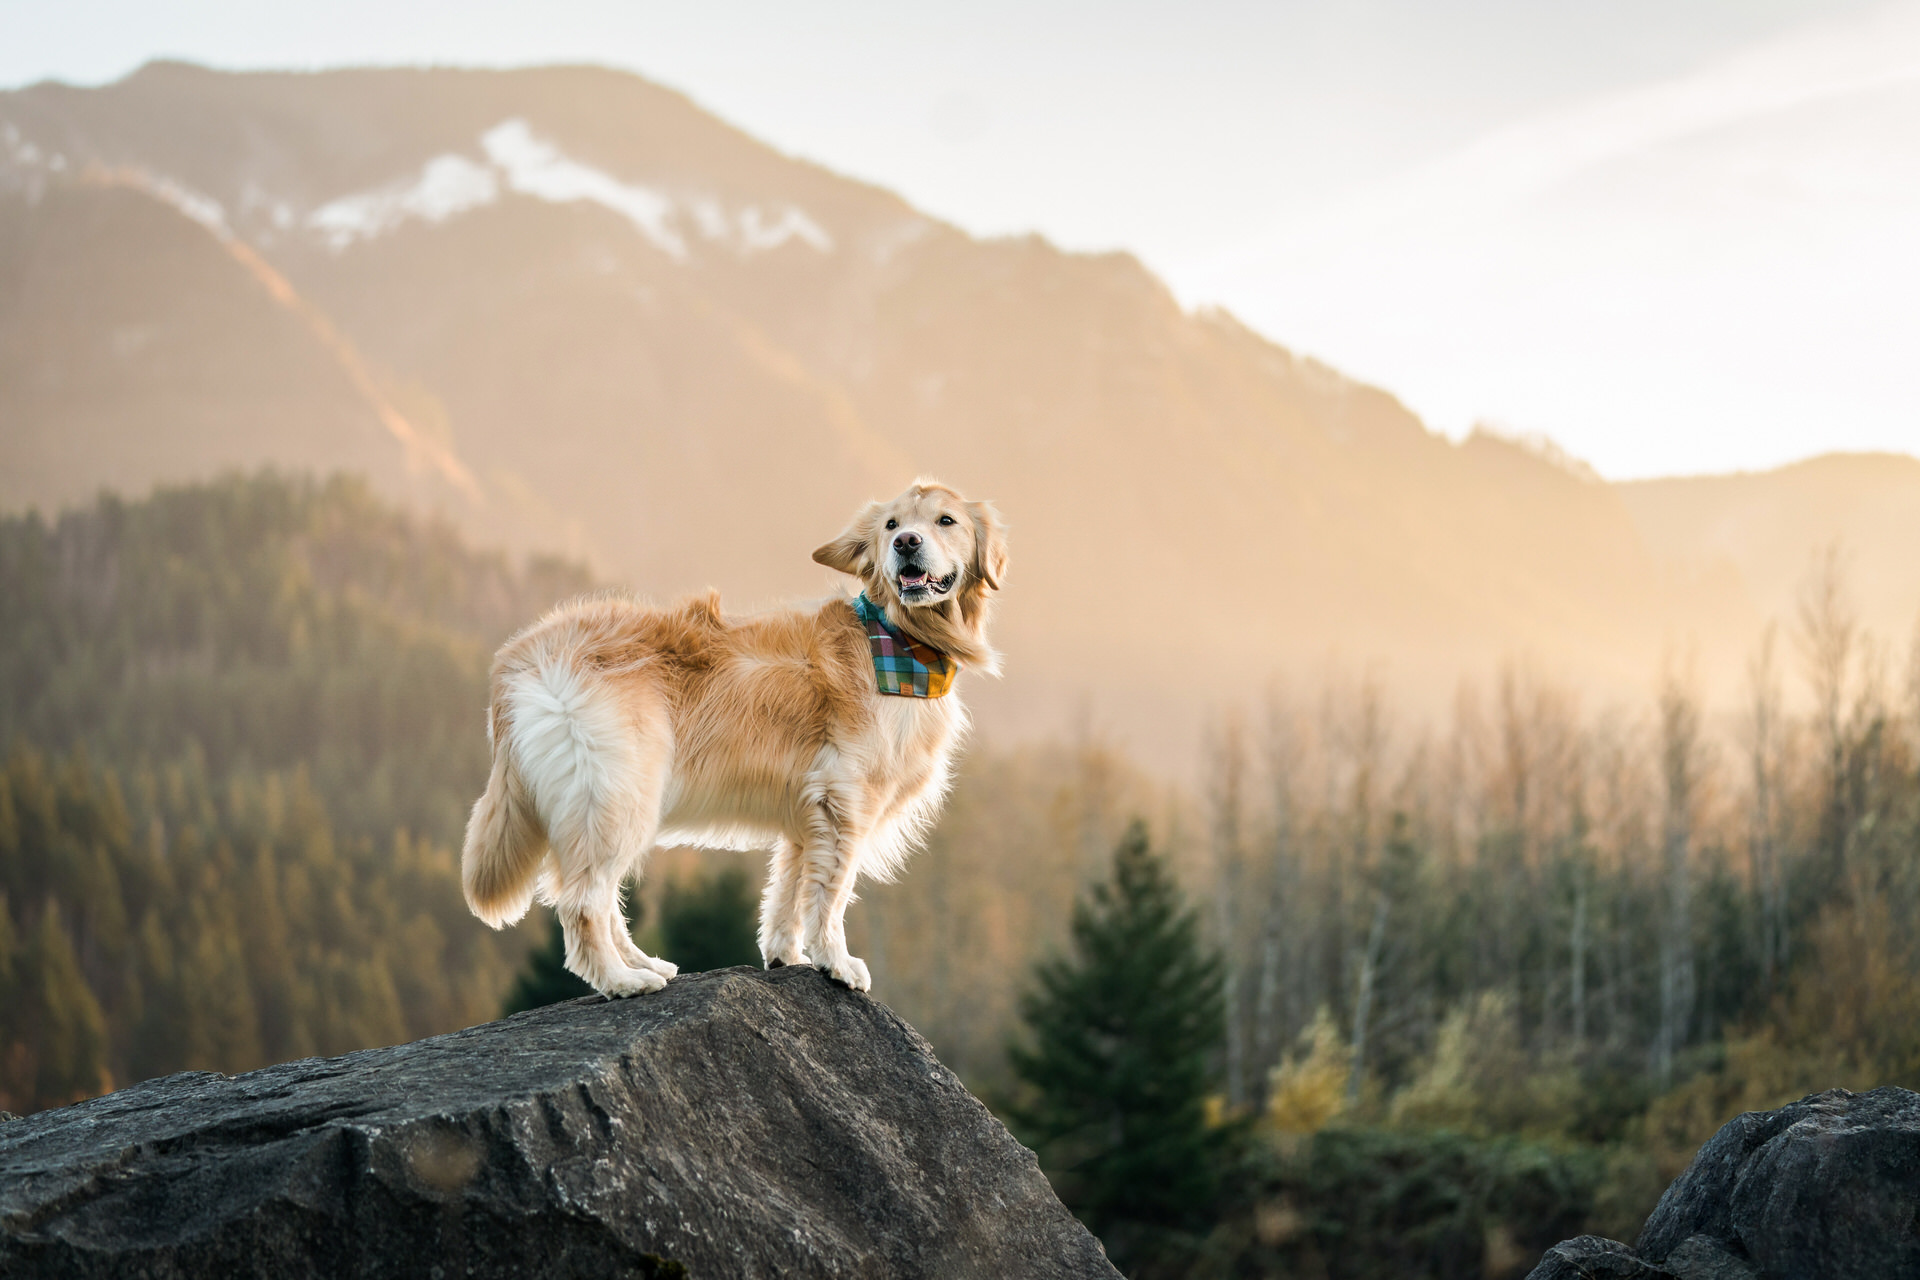 Golden retriever's hair and ear blows in the wind while he stands on a rock